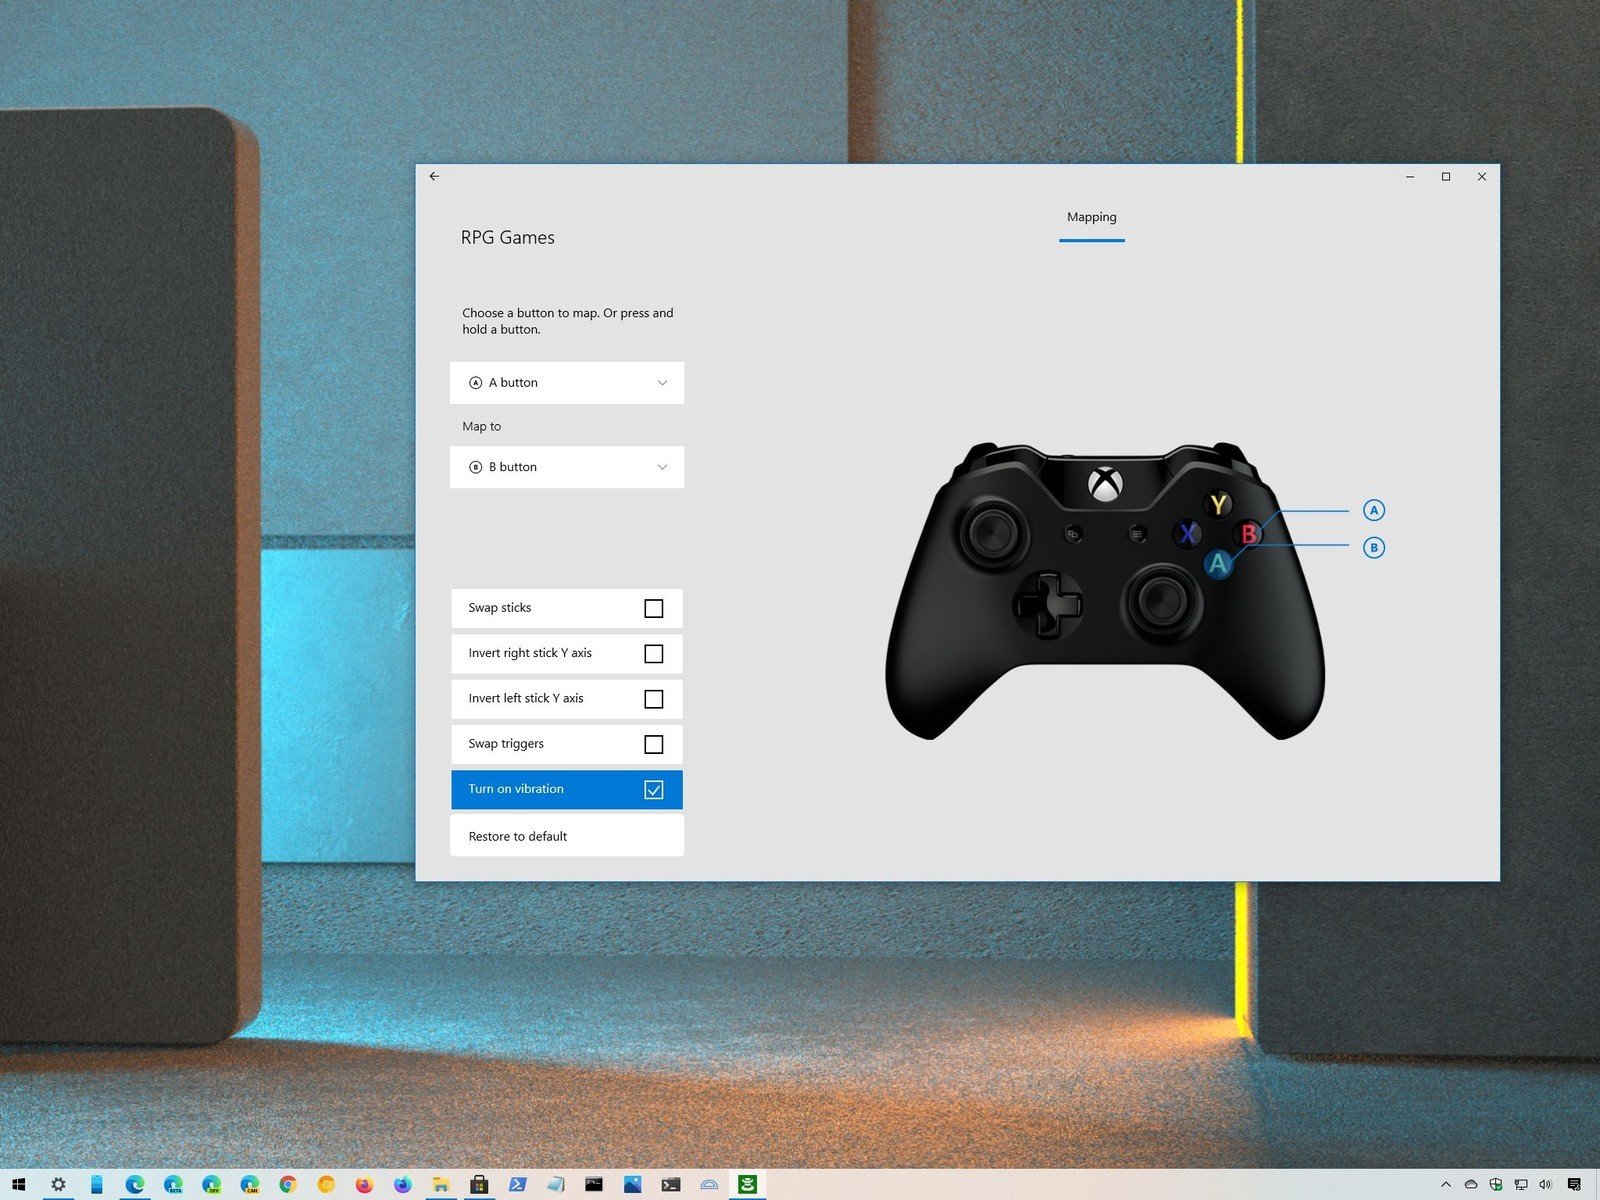 xbox one powera controller driver for pc